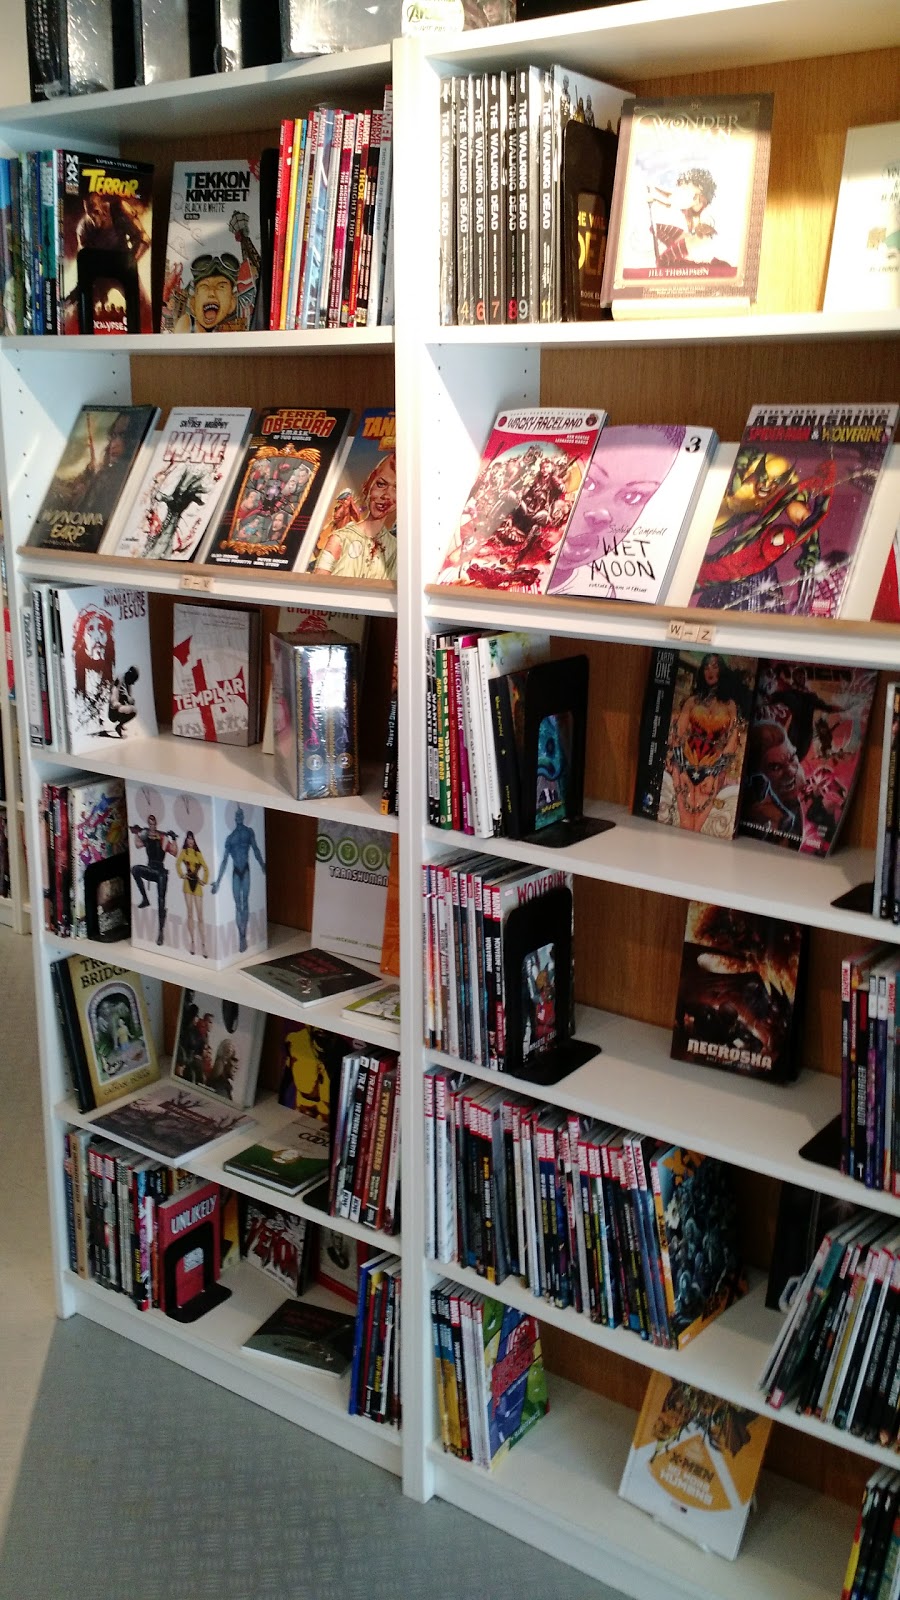 Crossover Comics | book store | 3560 Notre-Dame St W, Montreal, Quebec H4C 1P4, Canada | 5142847373 OR +1 514-284-7373